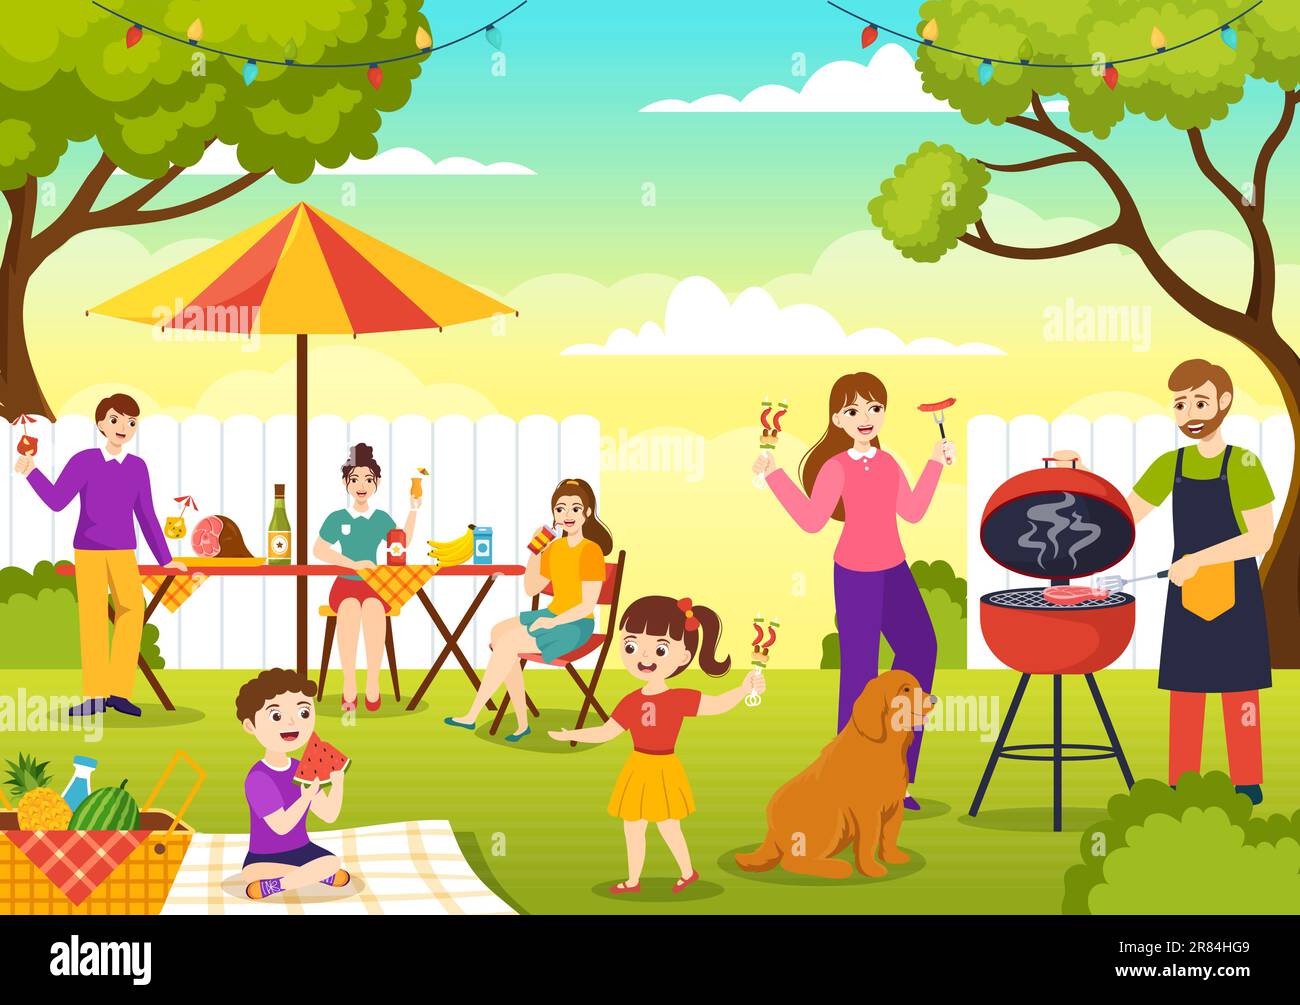 https://c8.alamy.com/comp/2R84HG9/barbecue-and-grill-set-vector-illustration-kids-grilling-or-bbq-party-food-at-park-in-festival-and-summer-cooking-cartoon-hand-drawn-templates-2R84HG9.jpg